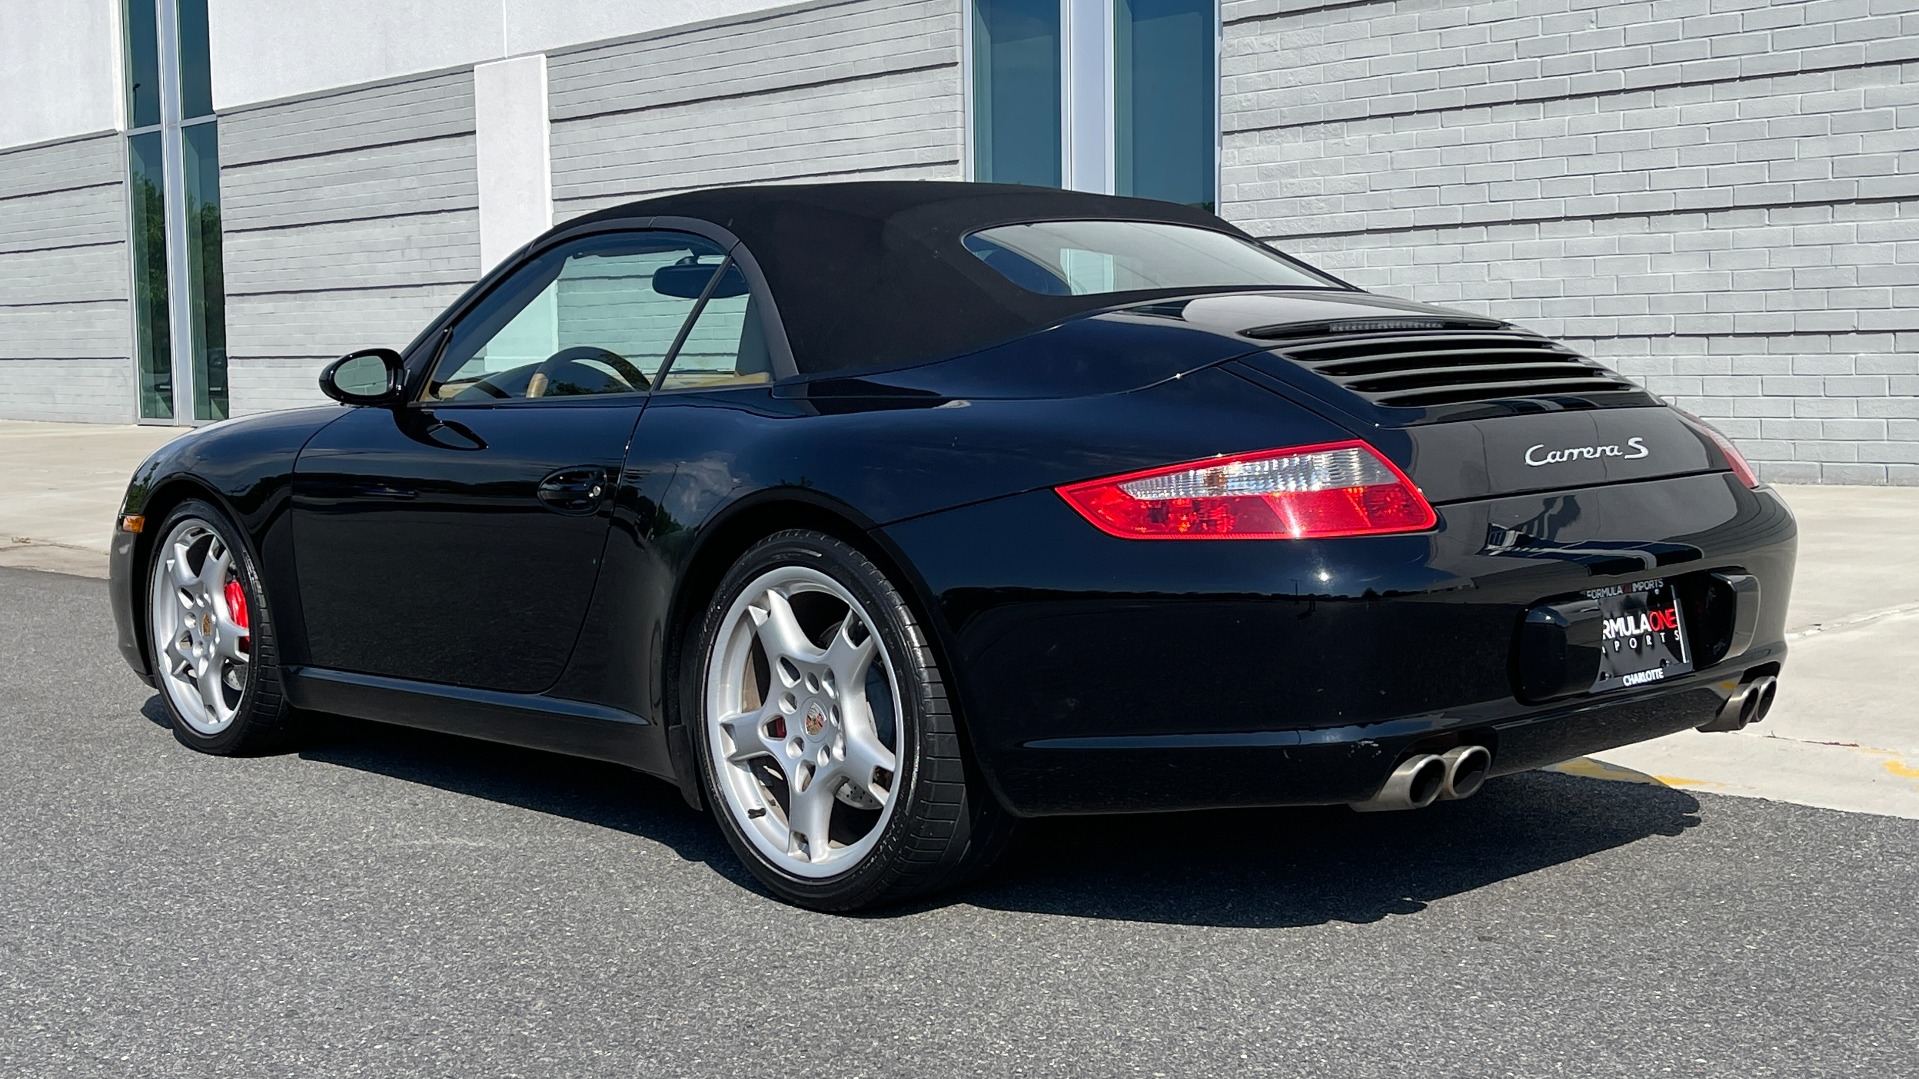 Used 2006 Porsche 911 CARRERA S CABRIOLET / BOSE / CD CHANGER / PWR SEAT PKG / HTD STS for sale $56,400 at Formula Imports in Charlotte NC 28227 14